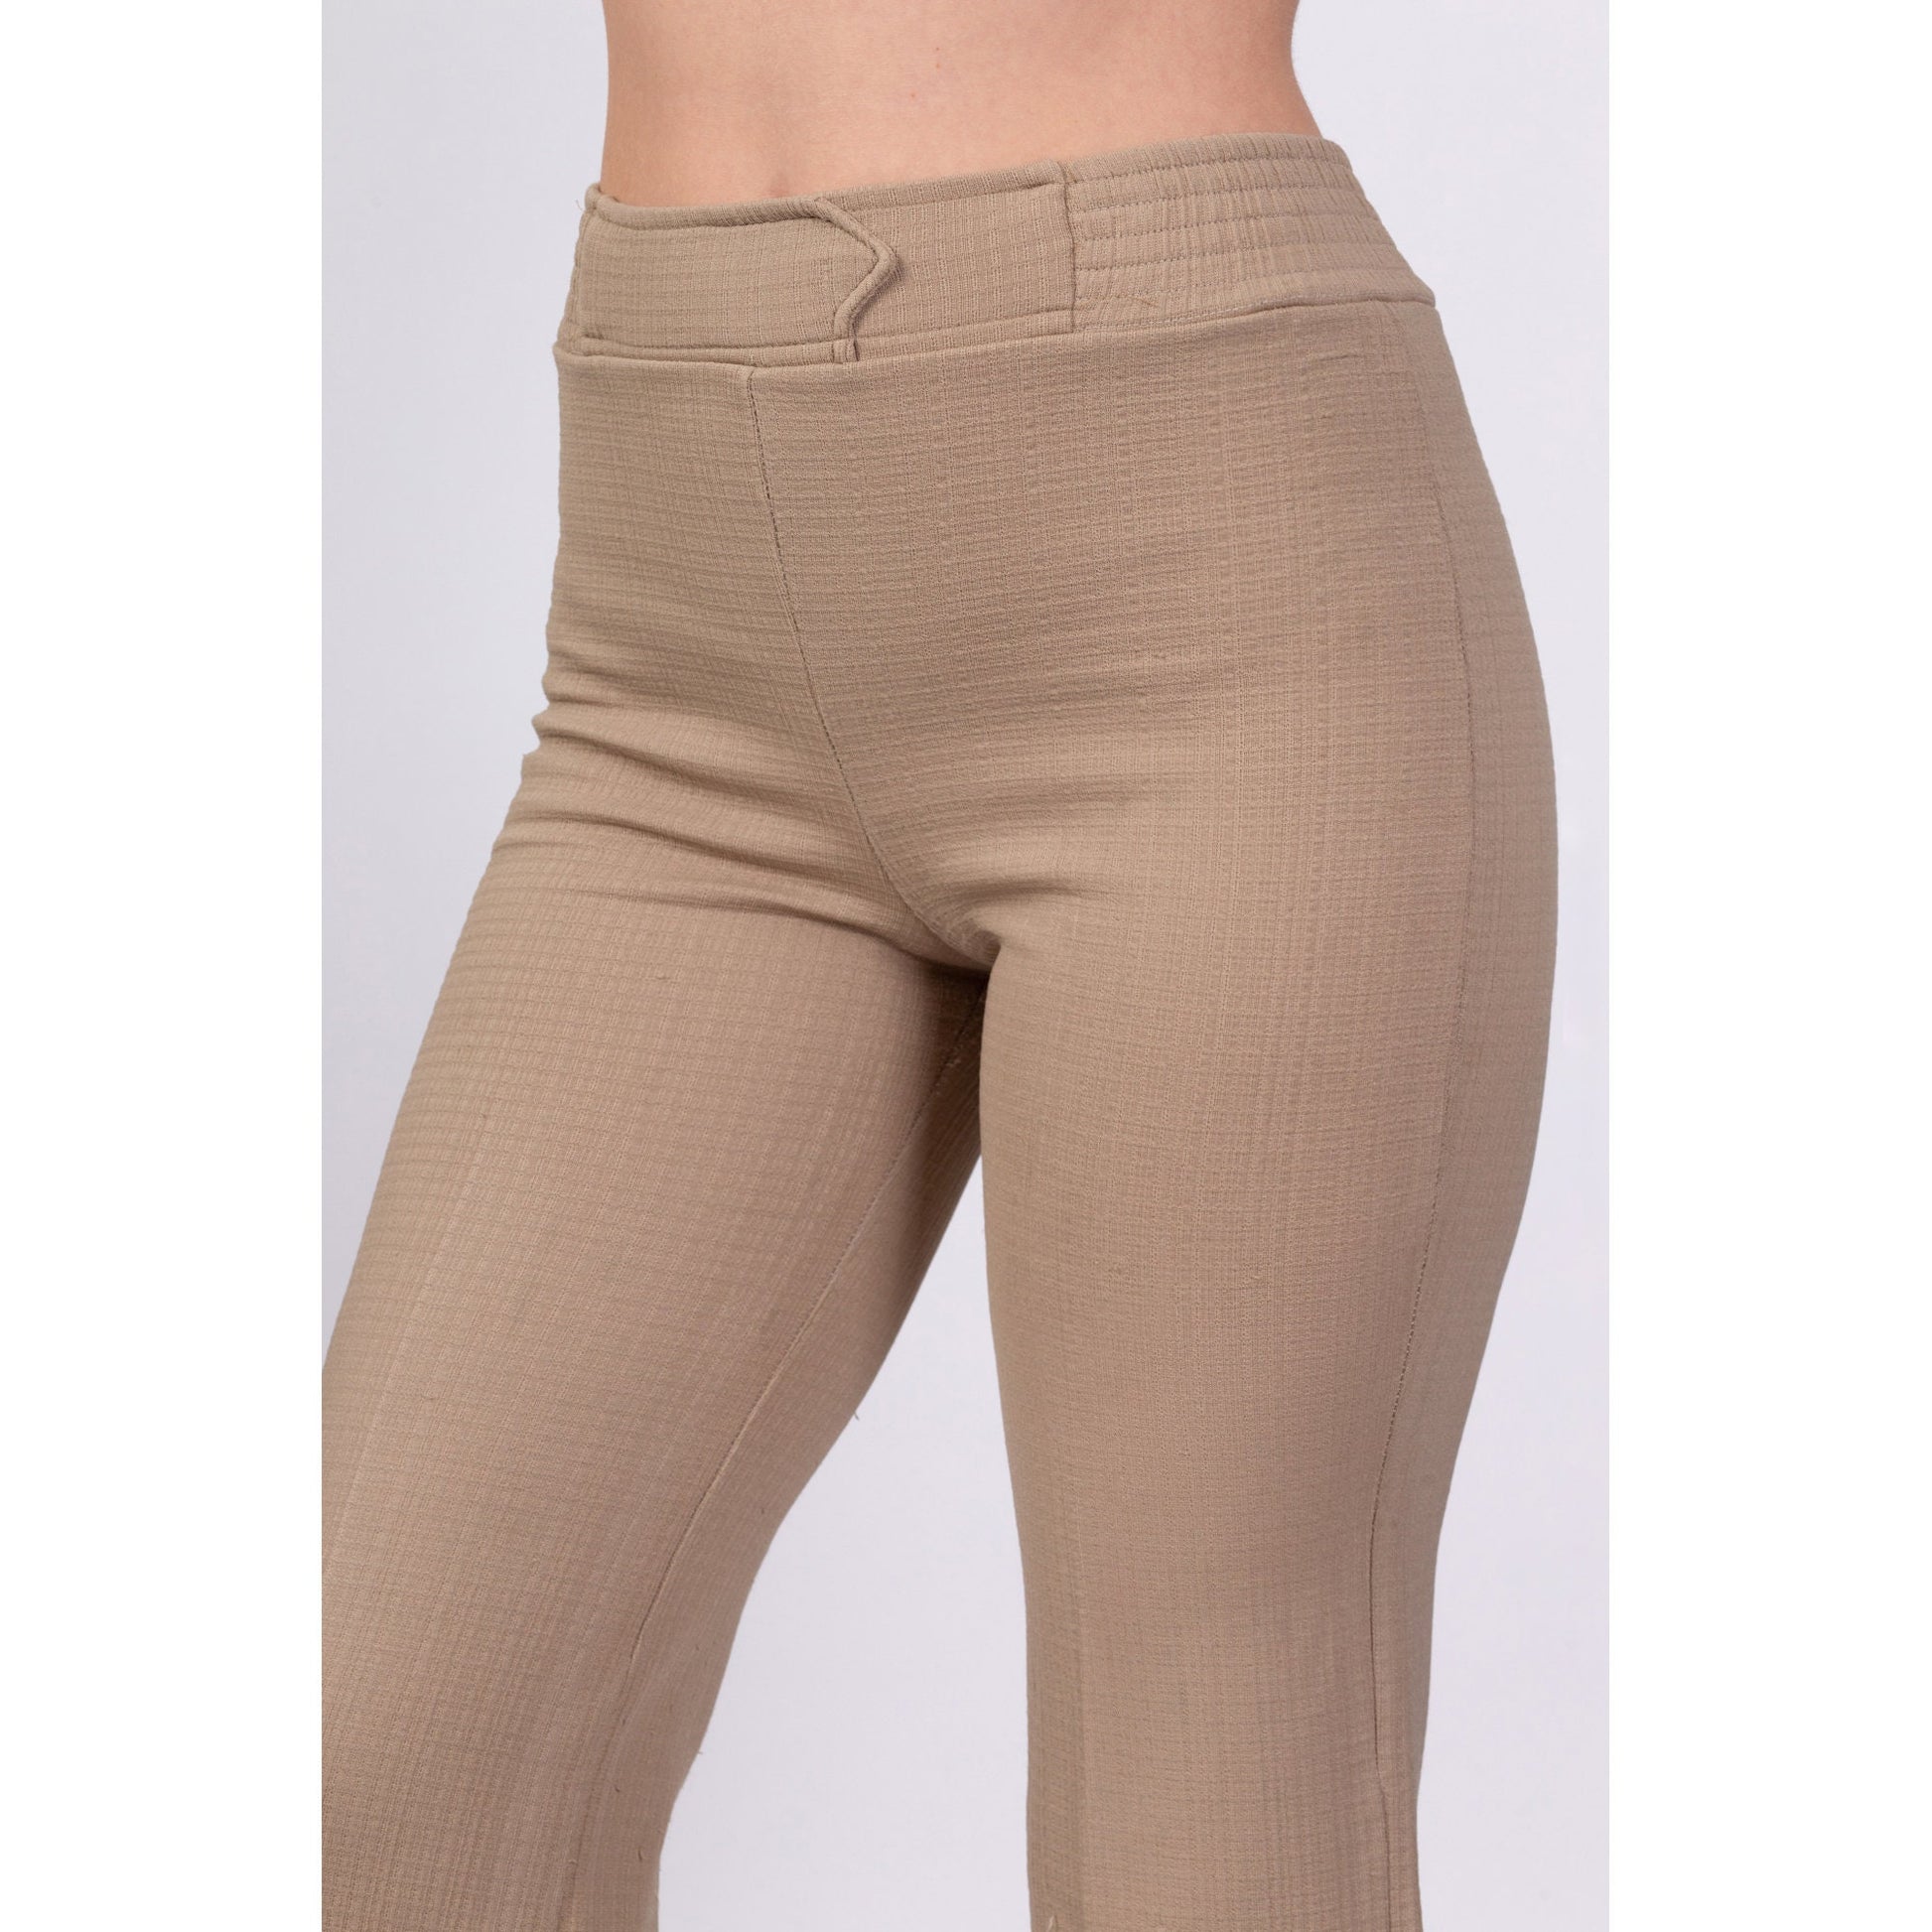 70s Taupe High Waisted Flared Pants - XS to Petite Small, 25-27 – Flying  Apple Vintage